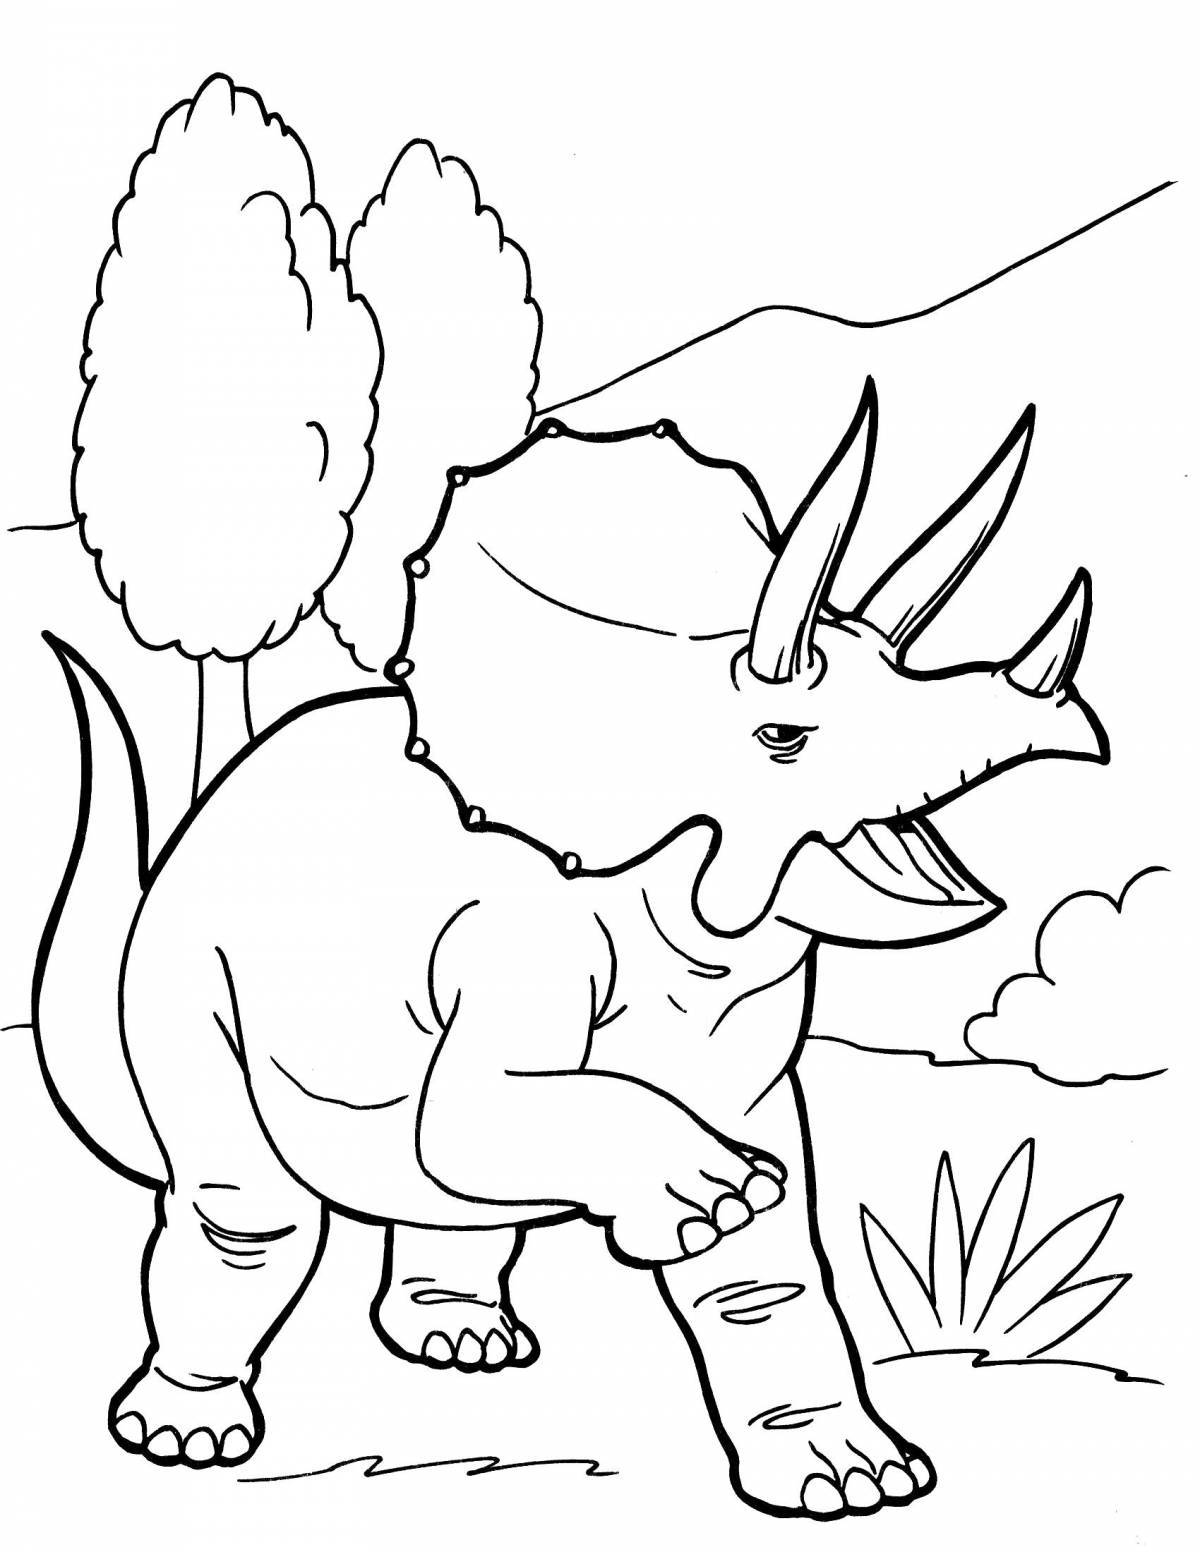 Coloring pages with playful dinosaurs for children 5-6 years old